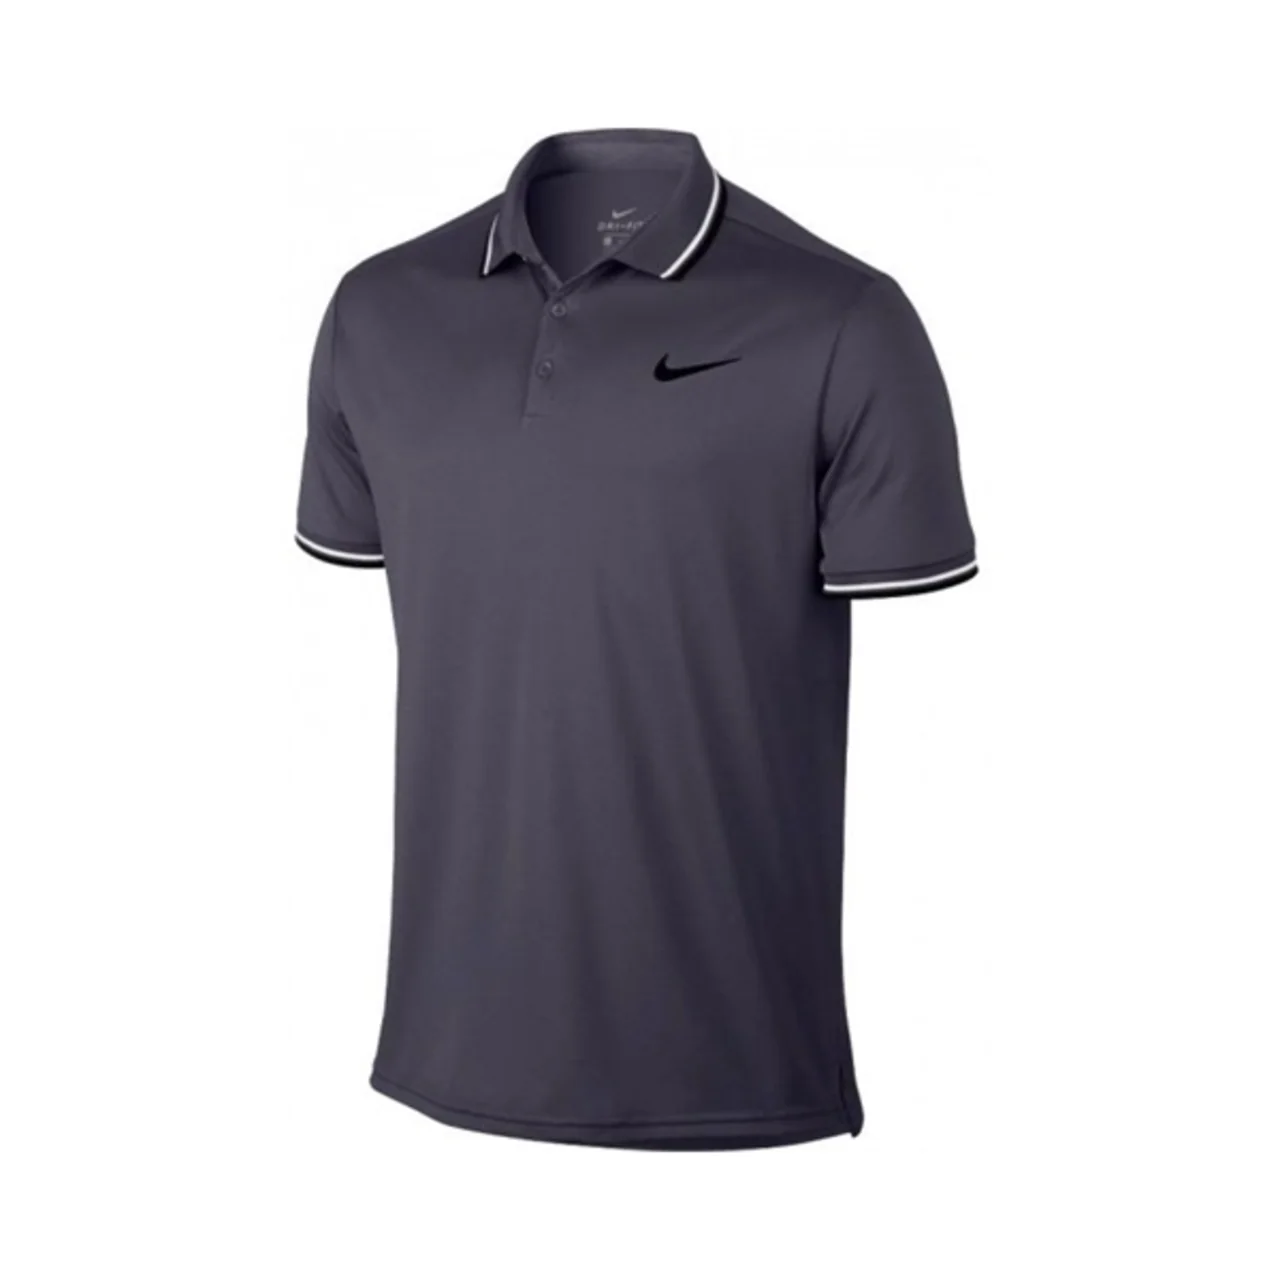 Nike Dry Solid Polo Grey